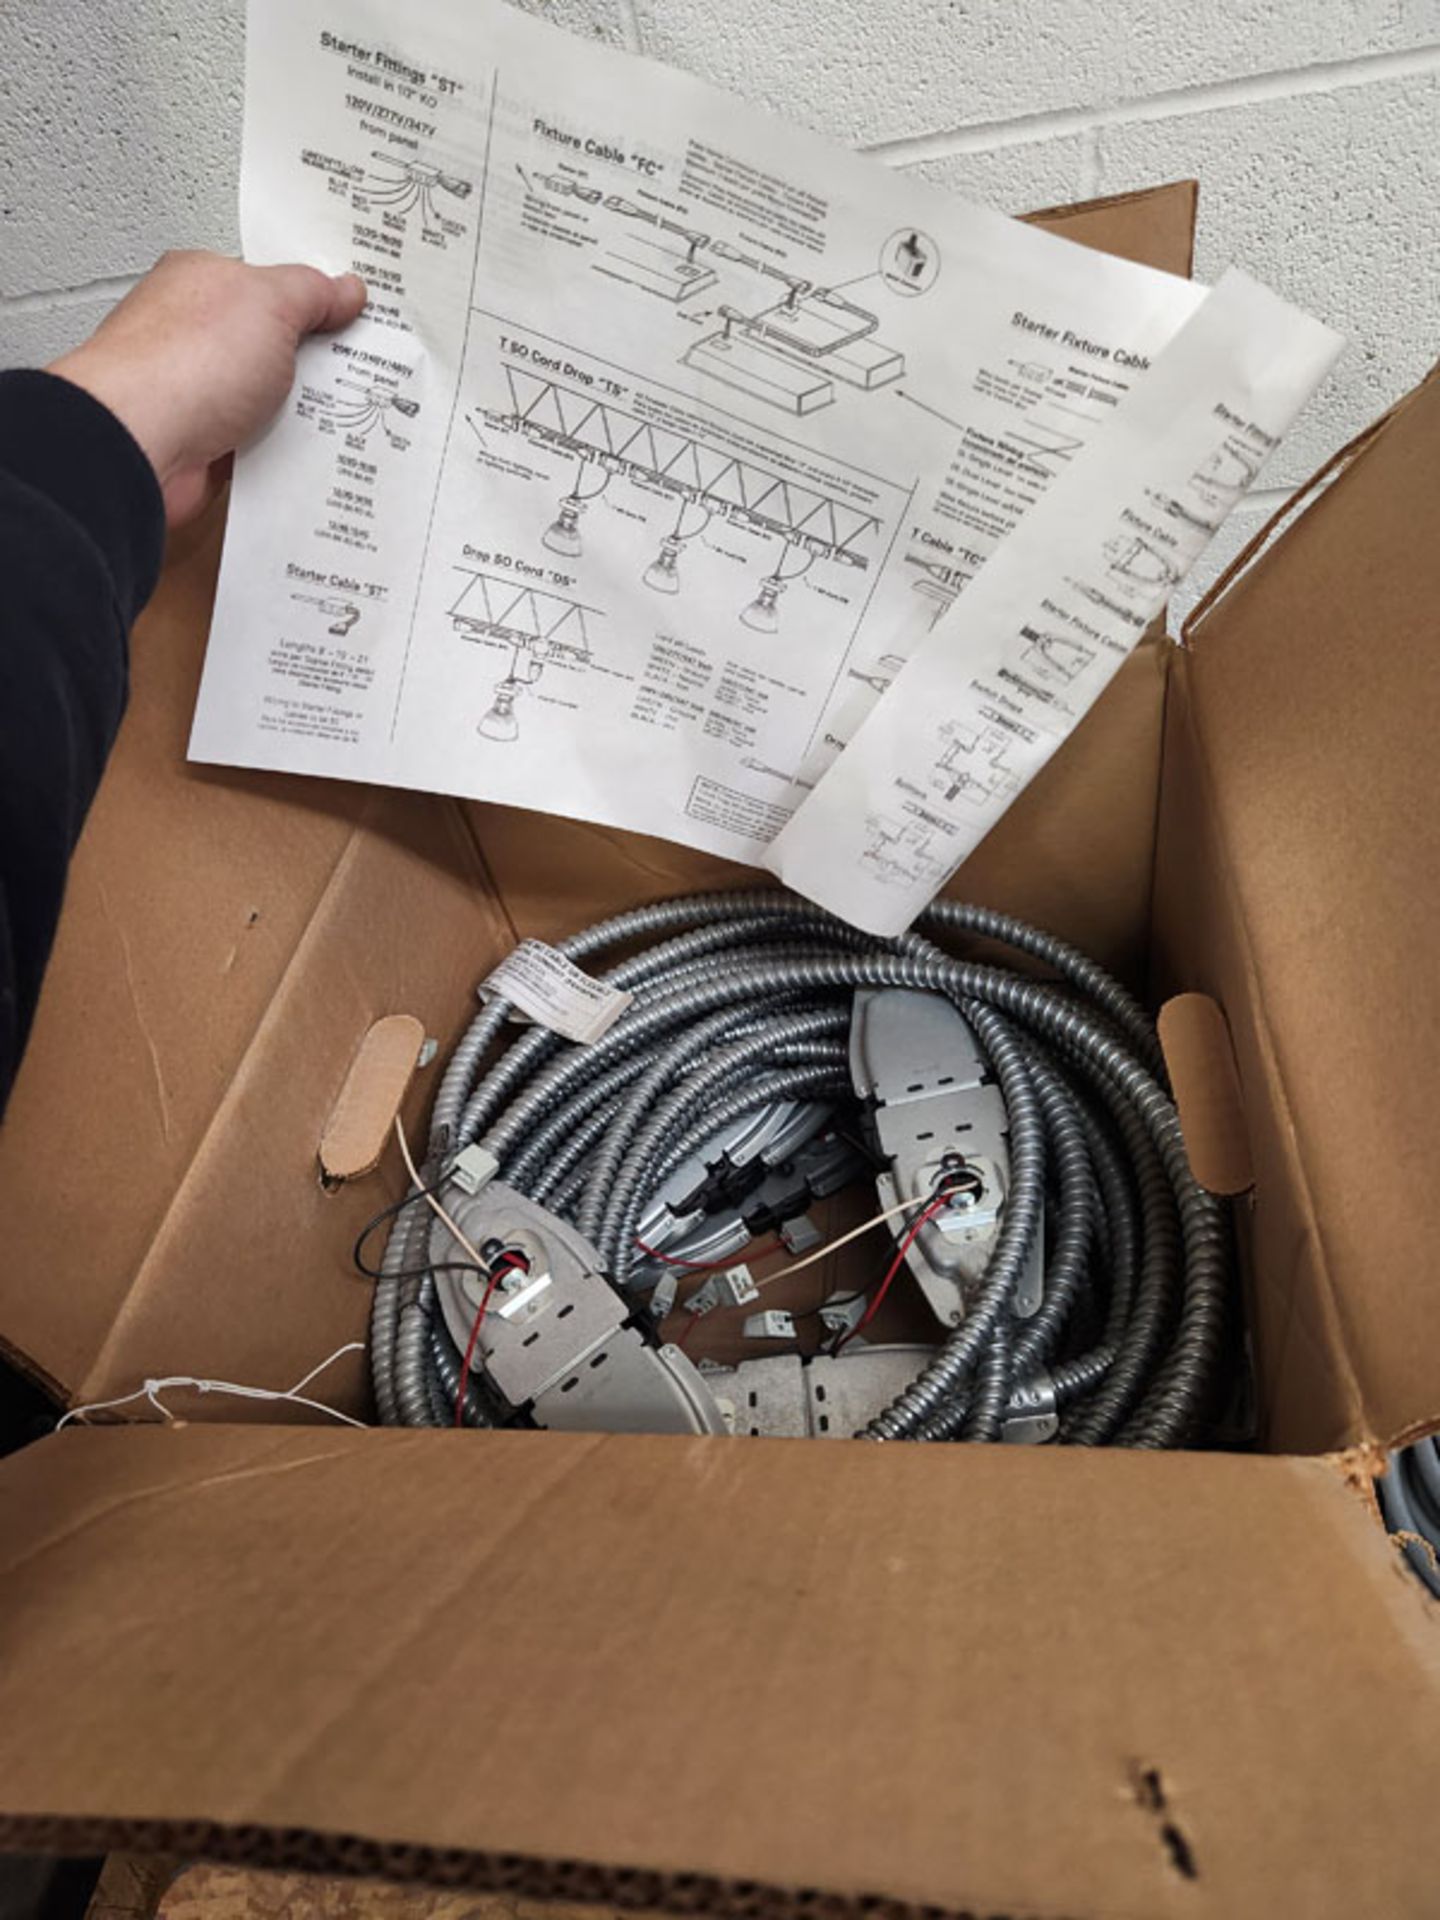 LOT OF 2 BOXES OF FIXTURE CABLES CAT. # 12FC12/3G09 - Image 3 of 3